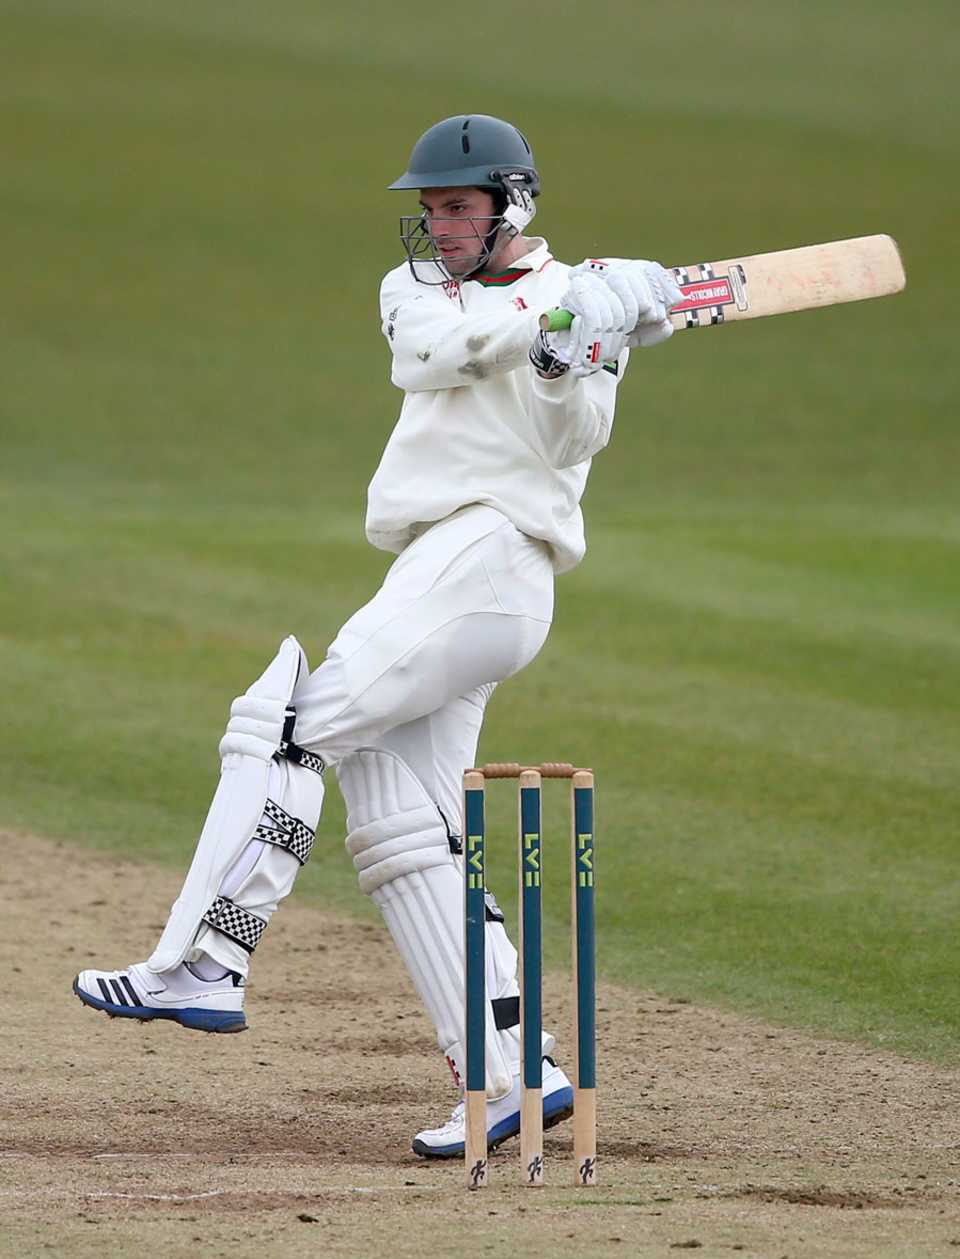 Ned Eckersley reached the close of play on 99 not out